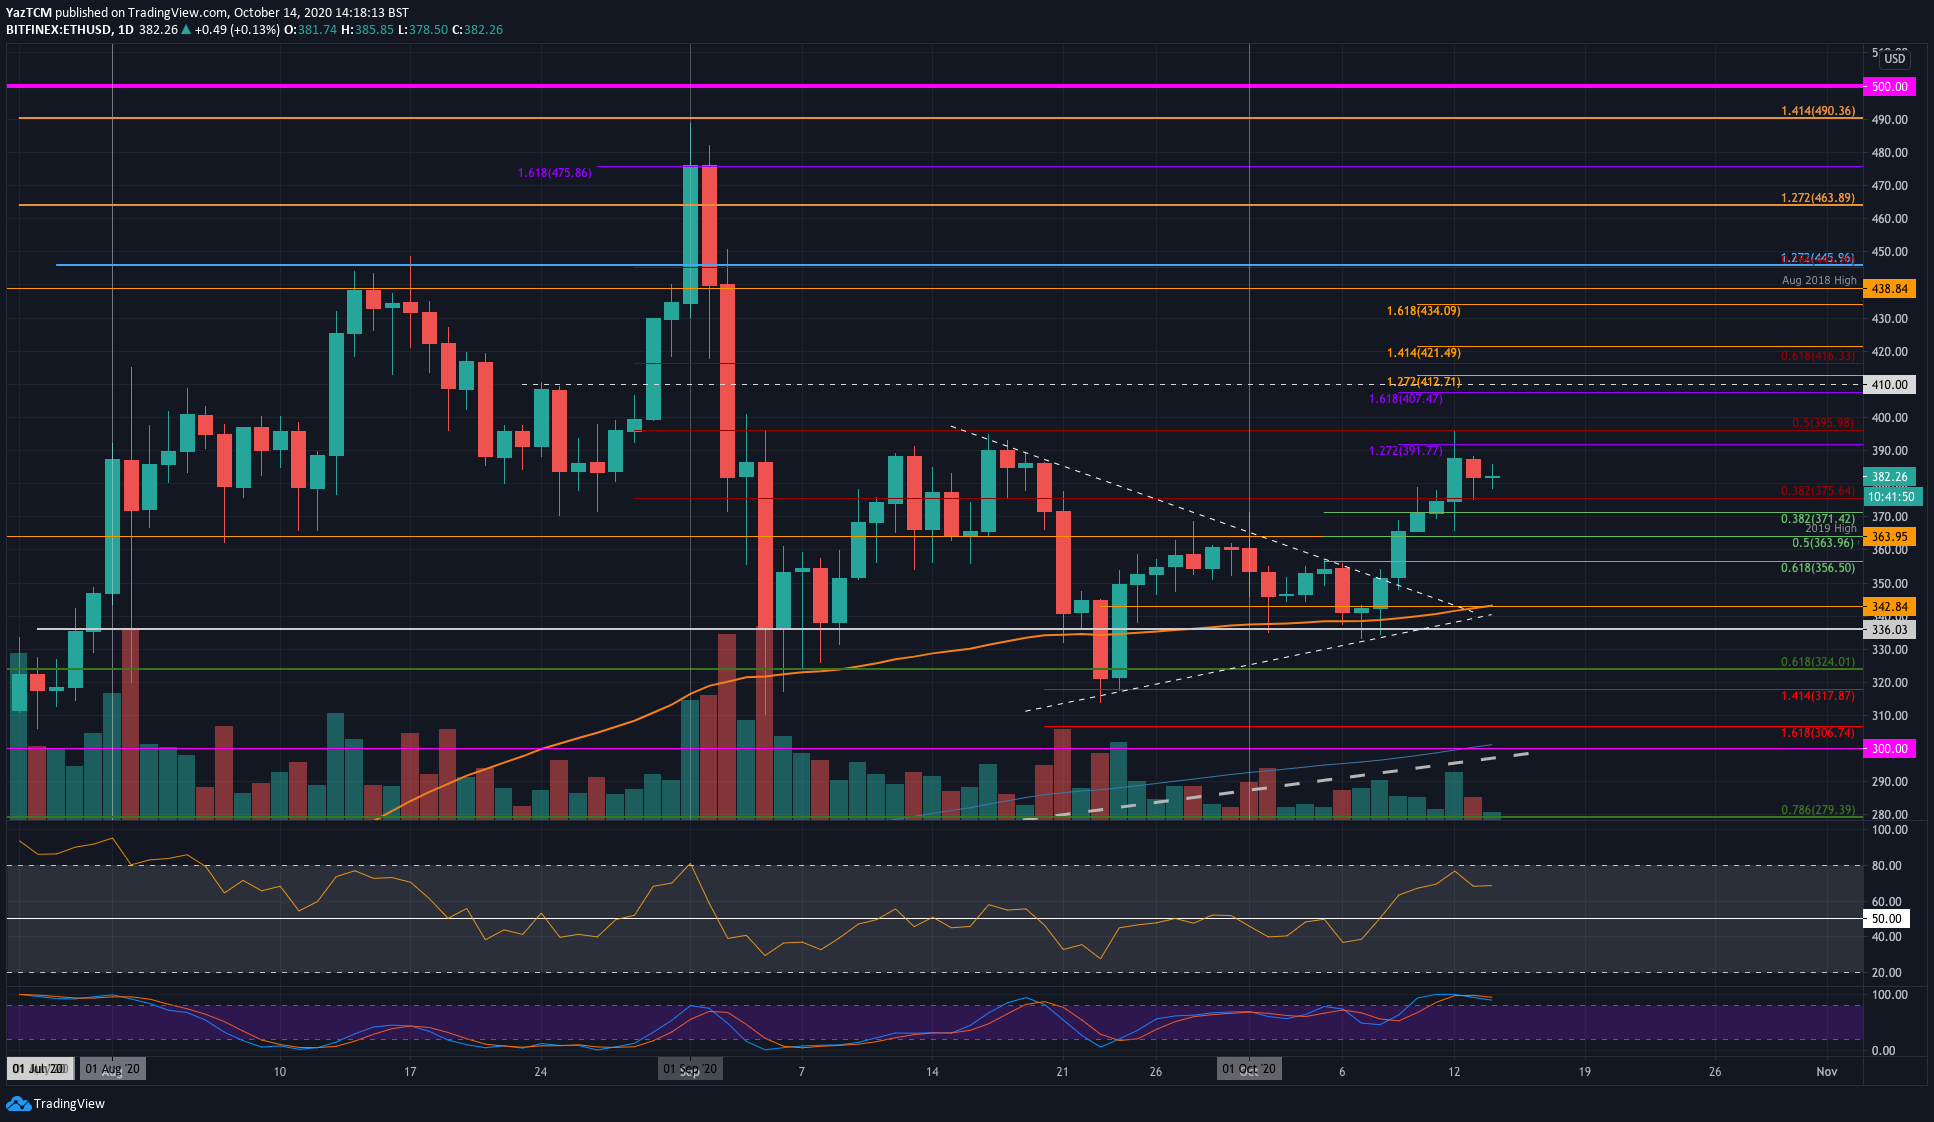 Ethereum Bulls Back in Town Following 13% Weekly Increase (ETH Price Analysis)